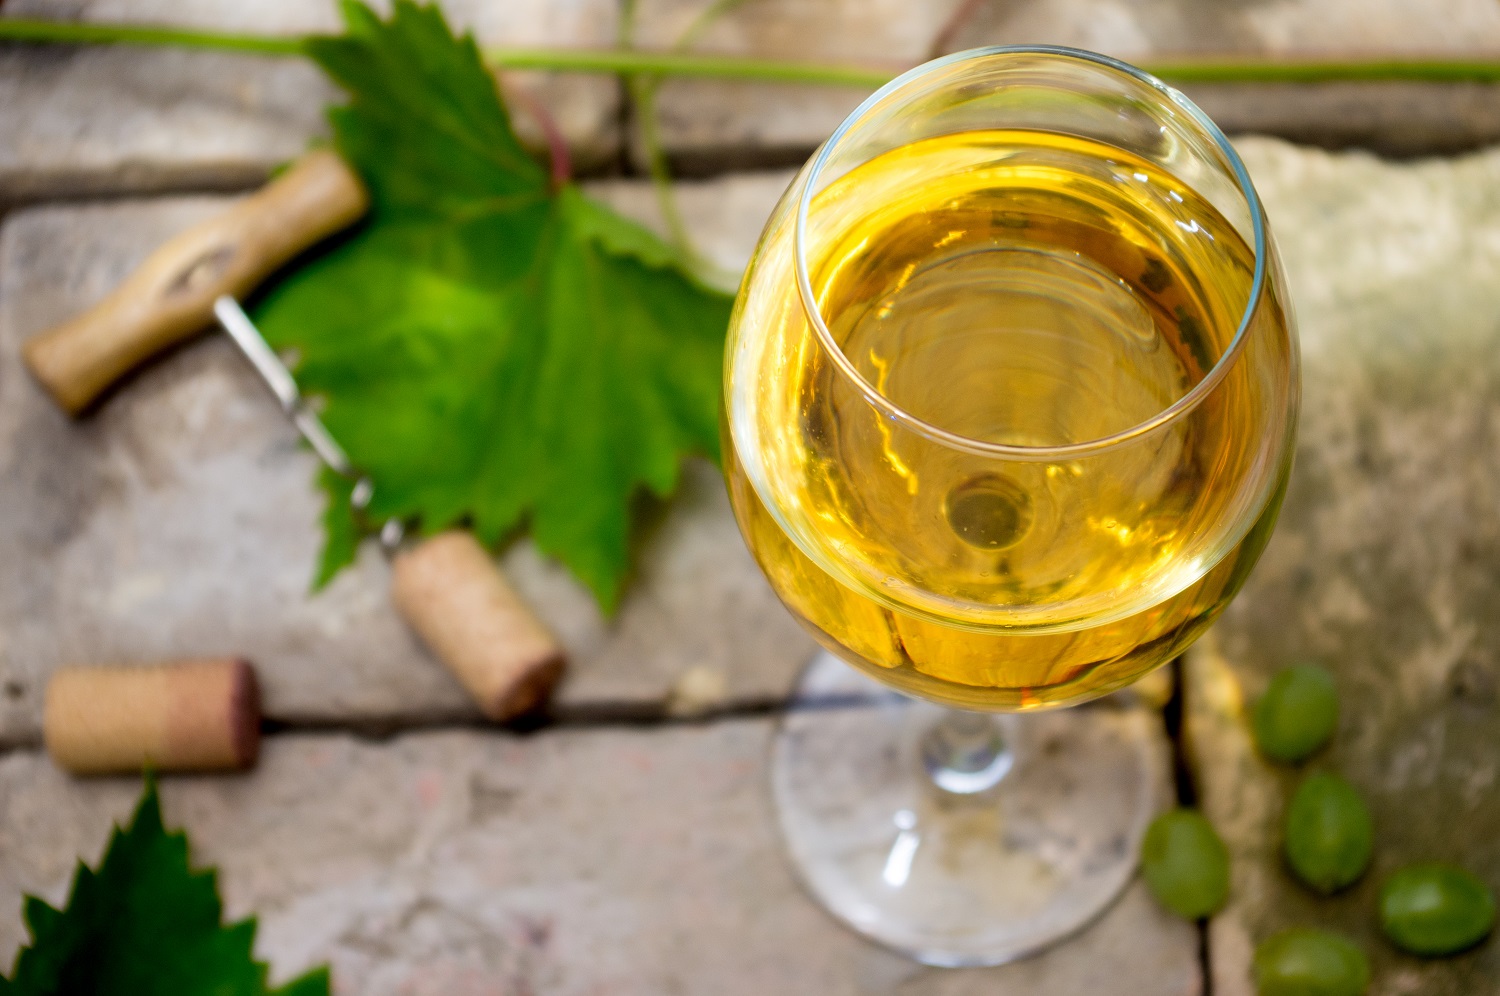 A glass of Chardonnay in an outdoor setting